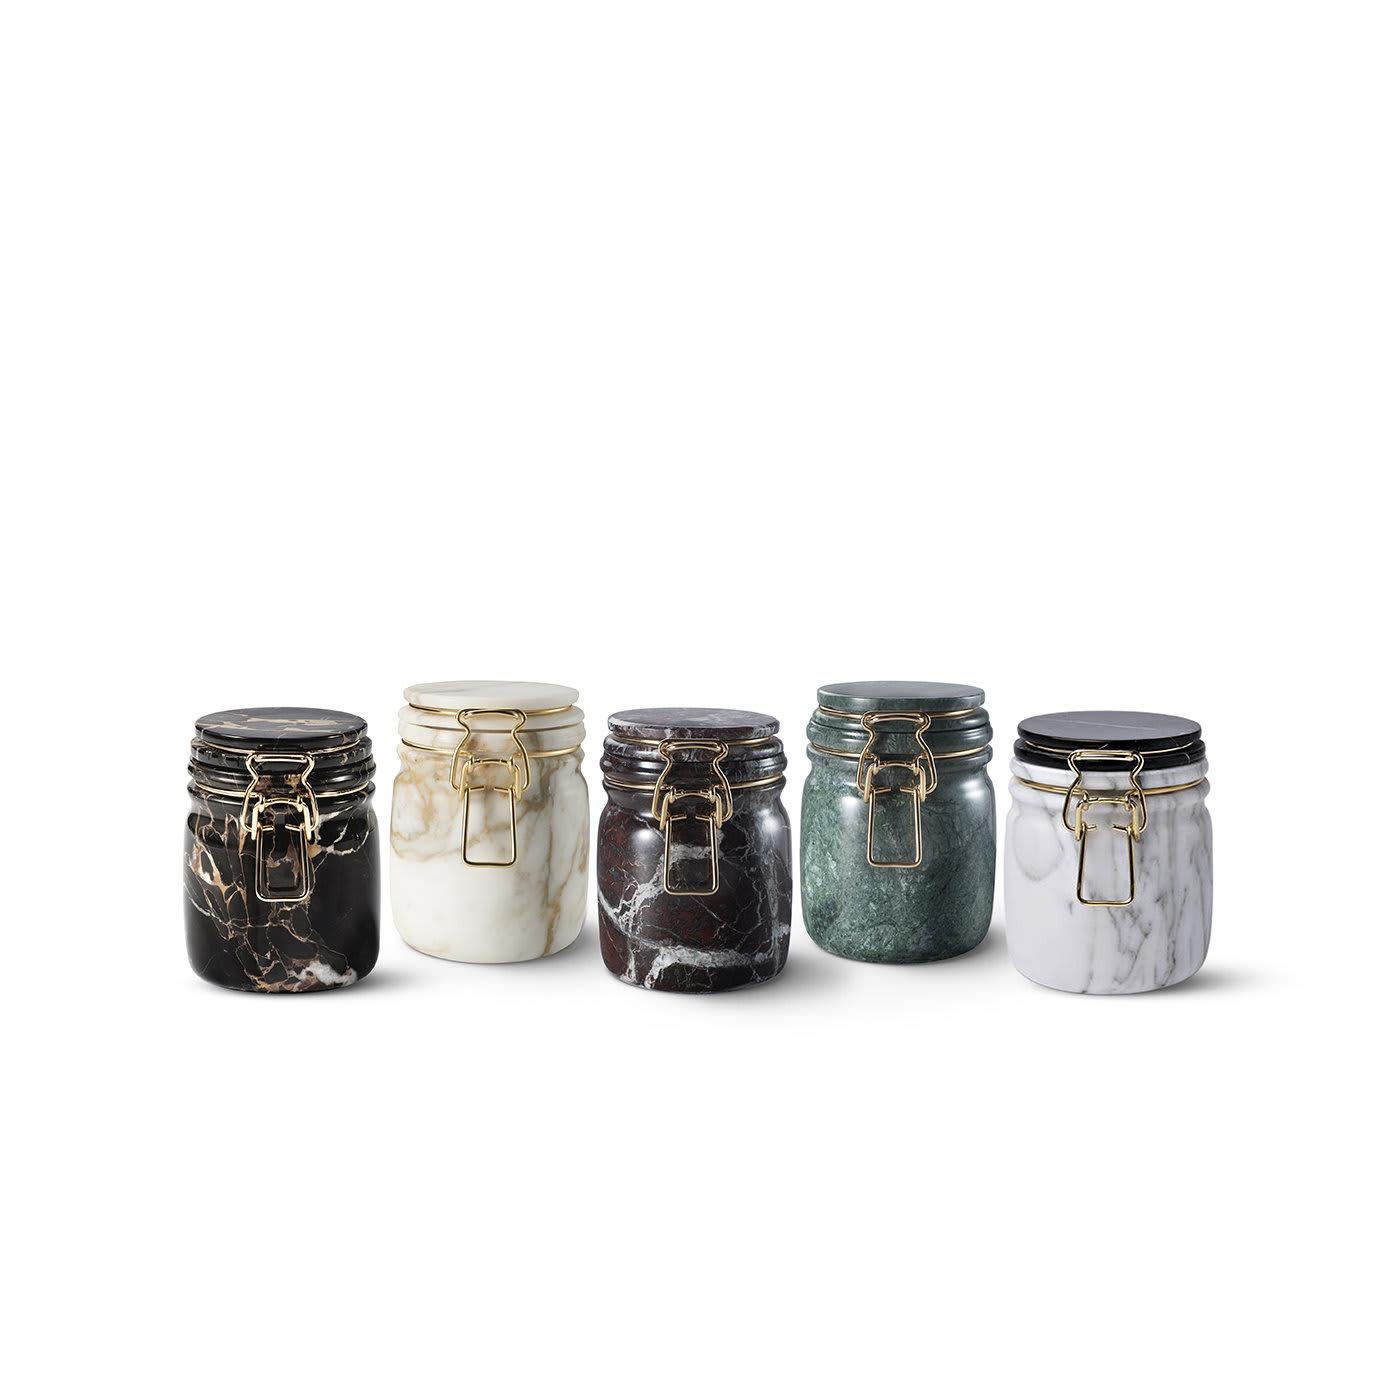 This stunning piece of functional decor is part of the Miss Marble collection, a series of versatile jars that retain the shape of the iconic kitchen accessory while boasting fine craftsmanship and precious materials. In this case, the body and lid